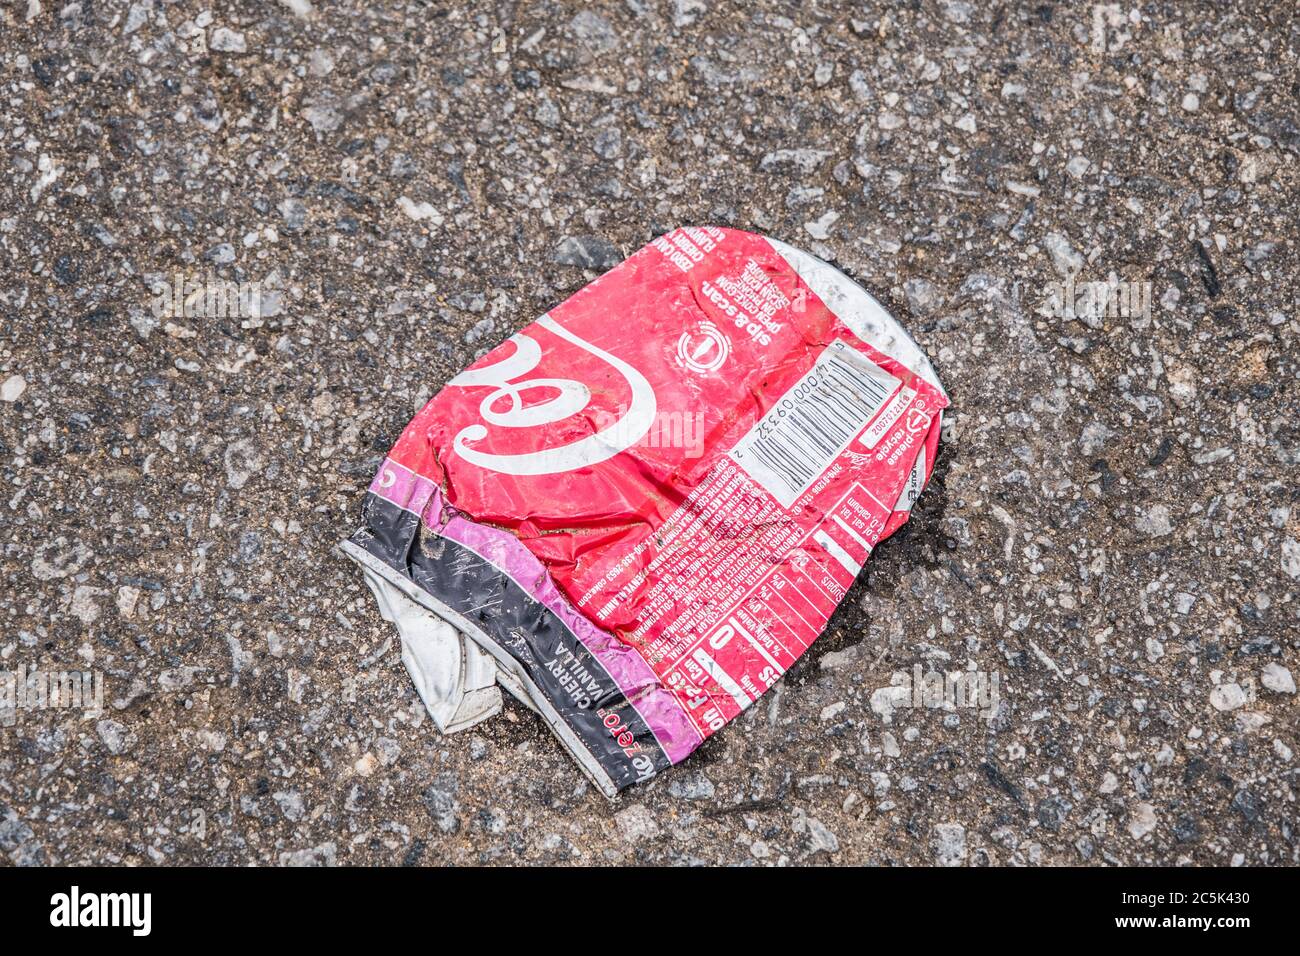 Smashed and crumpled empty Coca-Cola can laying on the ground in the street dumped carelessly polluting the environment Stock Photo